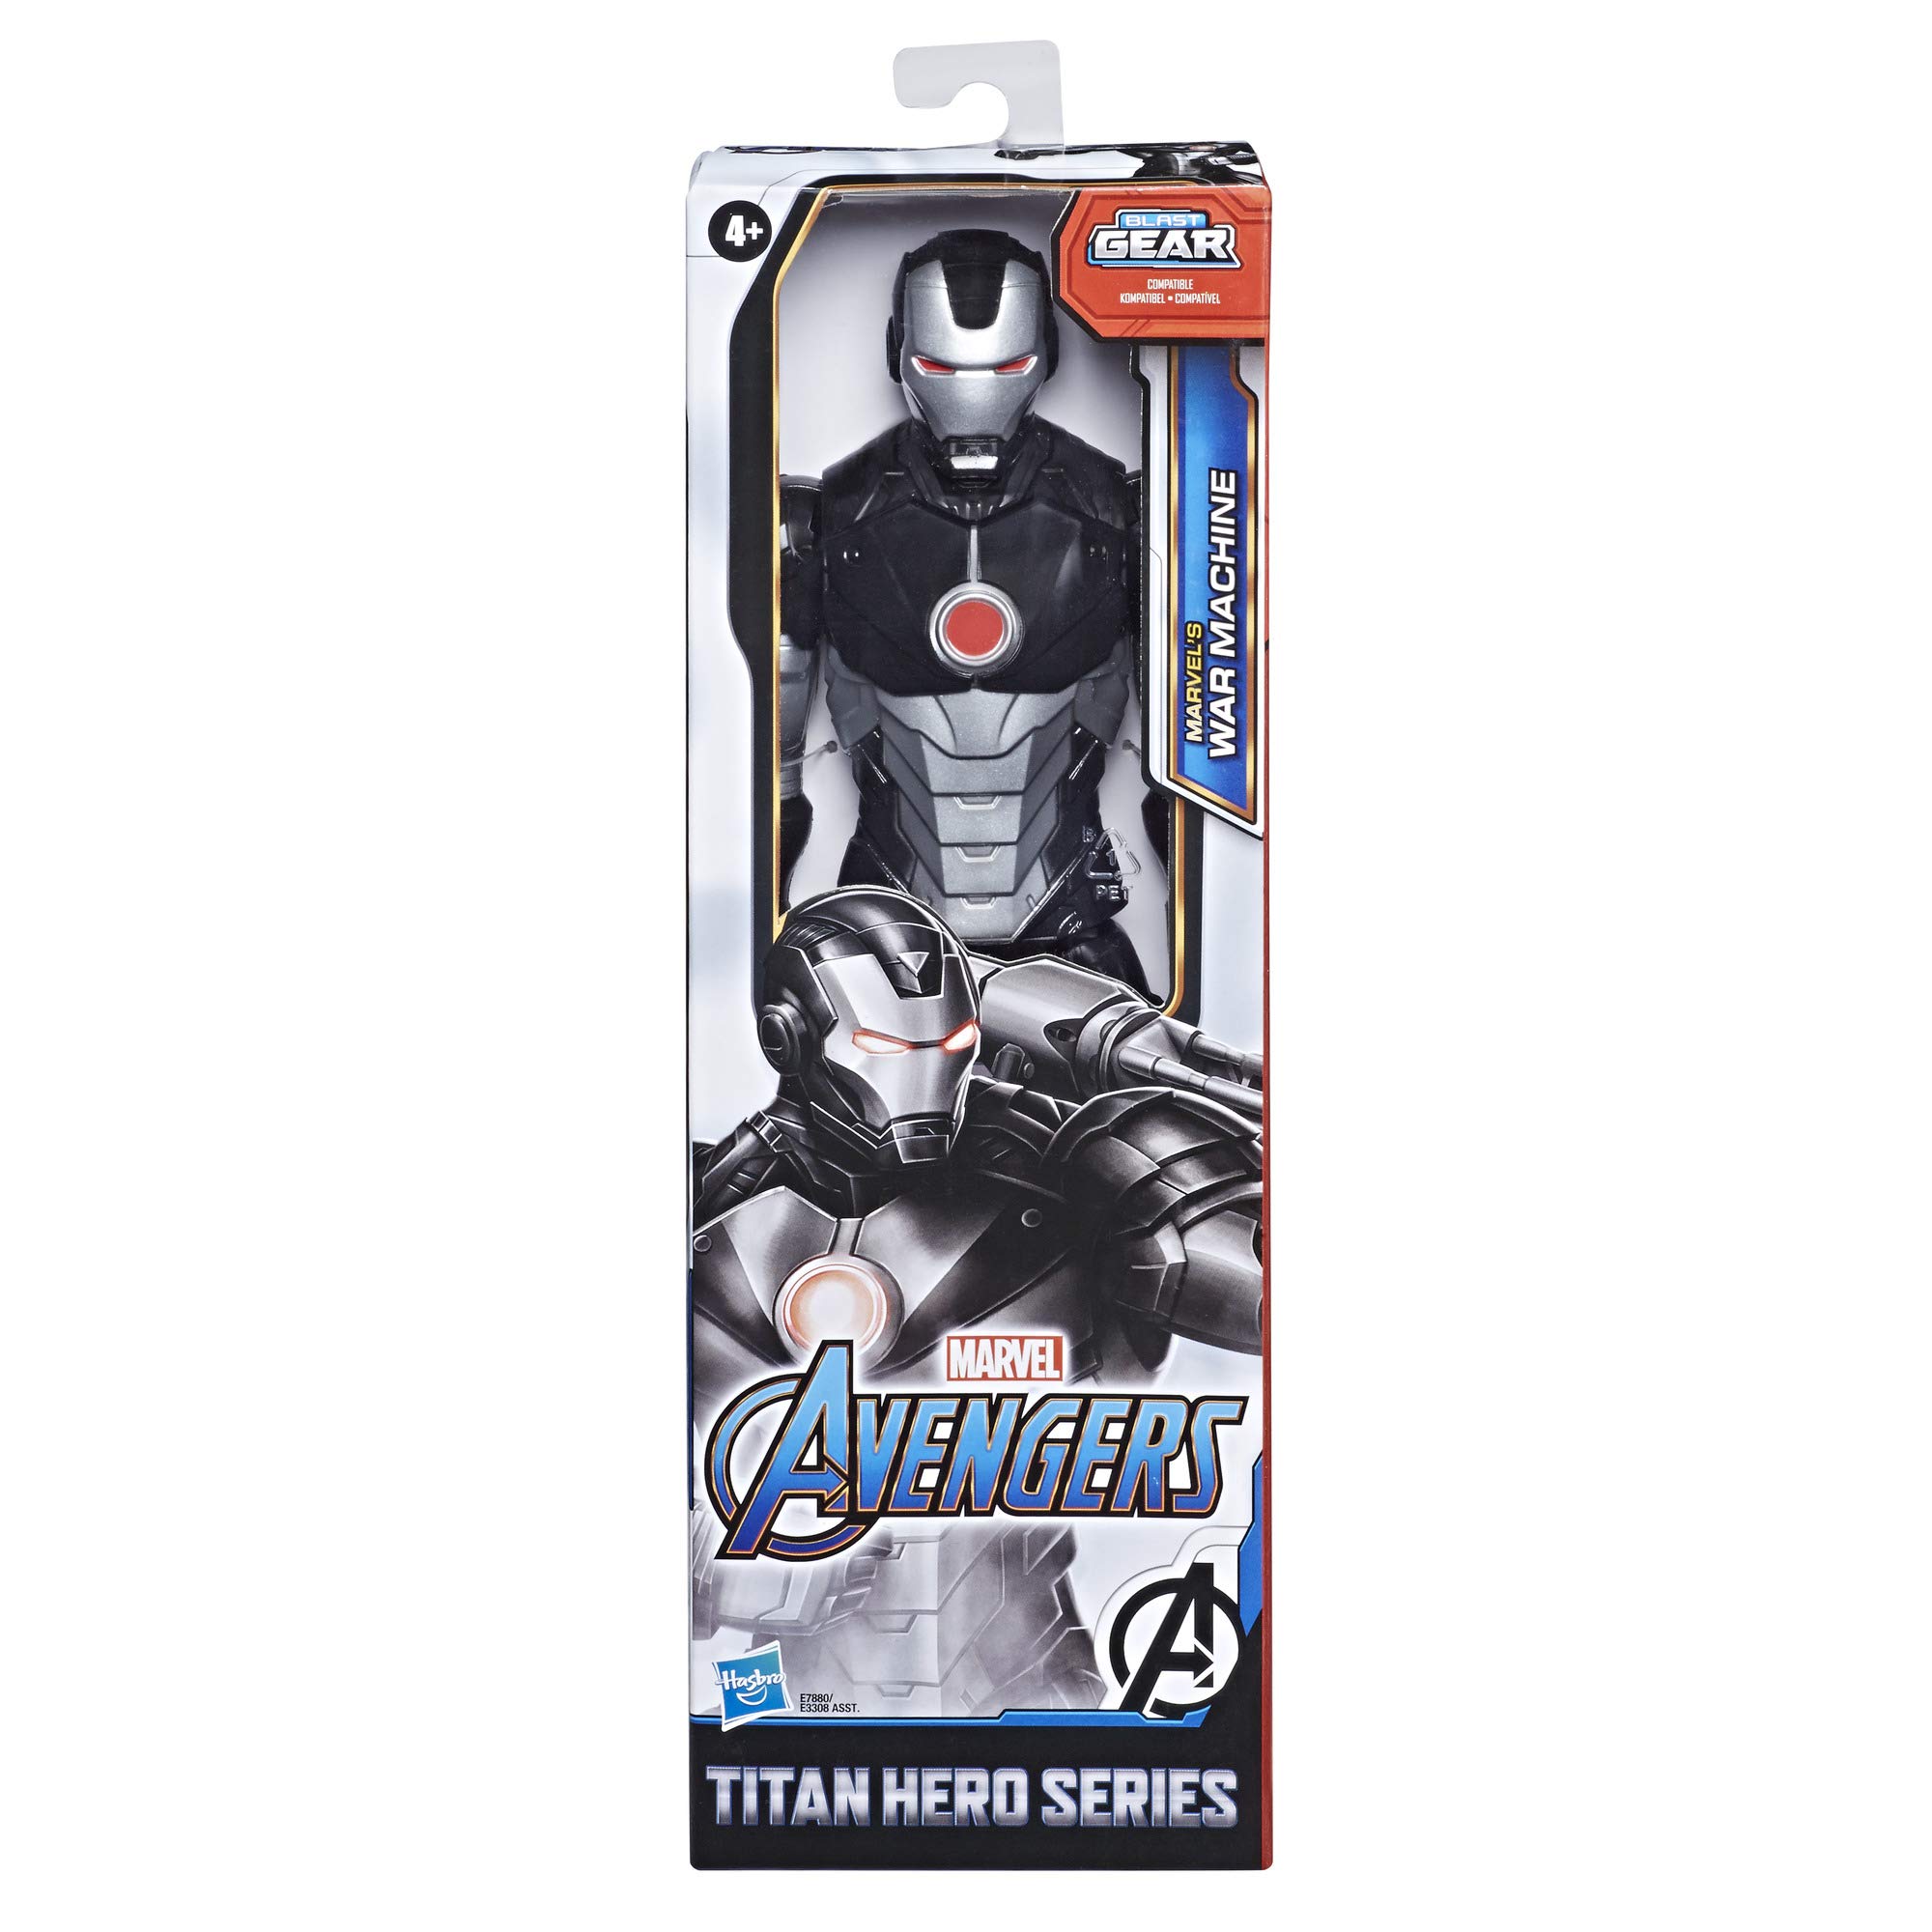 Avengers Titan Hero Series Blast Gear Marvel’s War Machine Action Figure, 12-Inch Toy, Inspired by The Marvel Universe, for Kids Ages 4 and Up